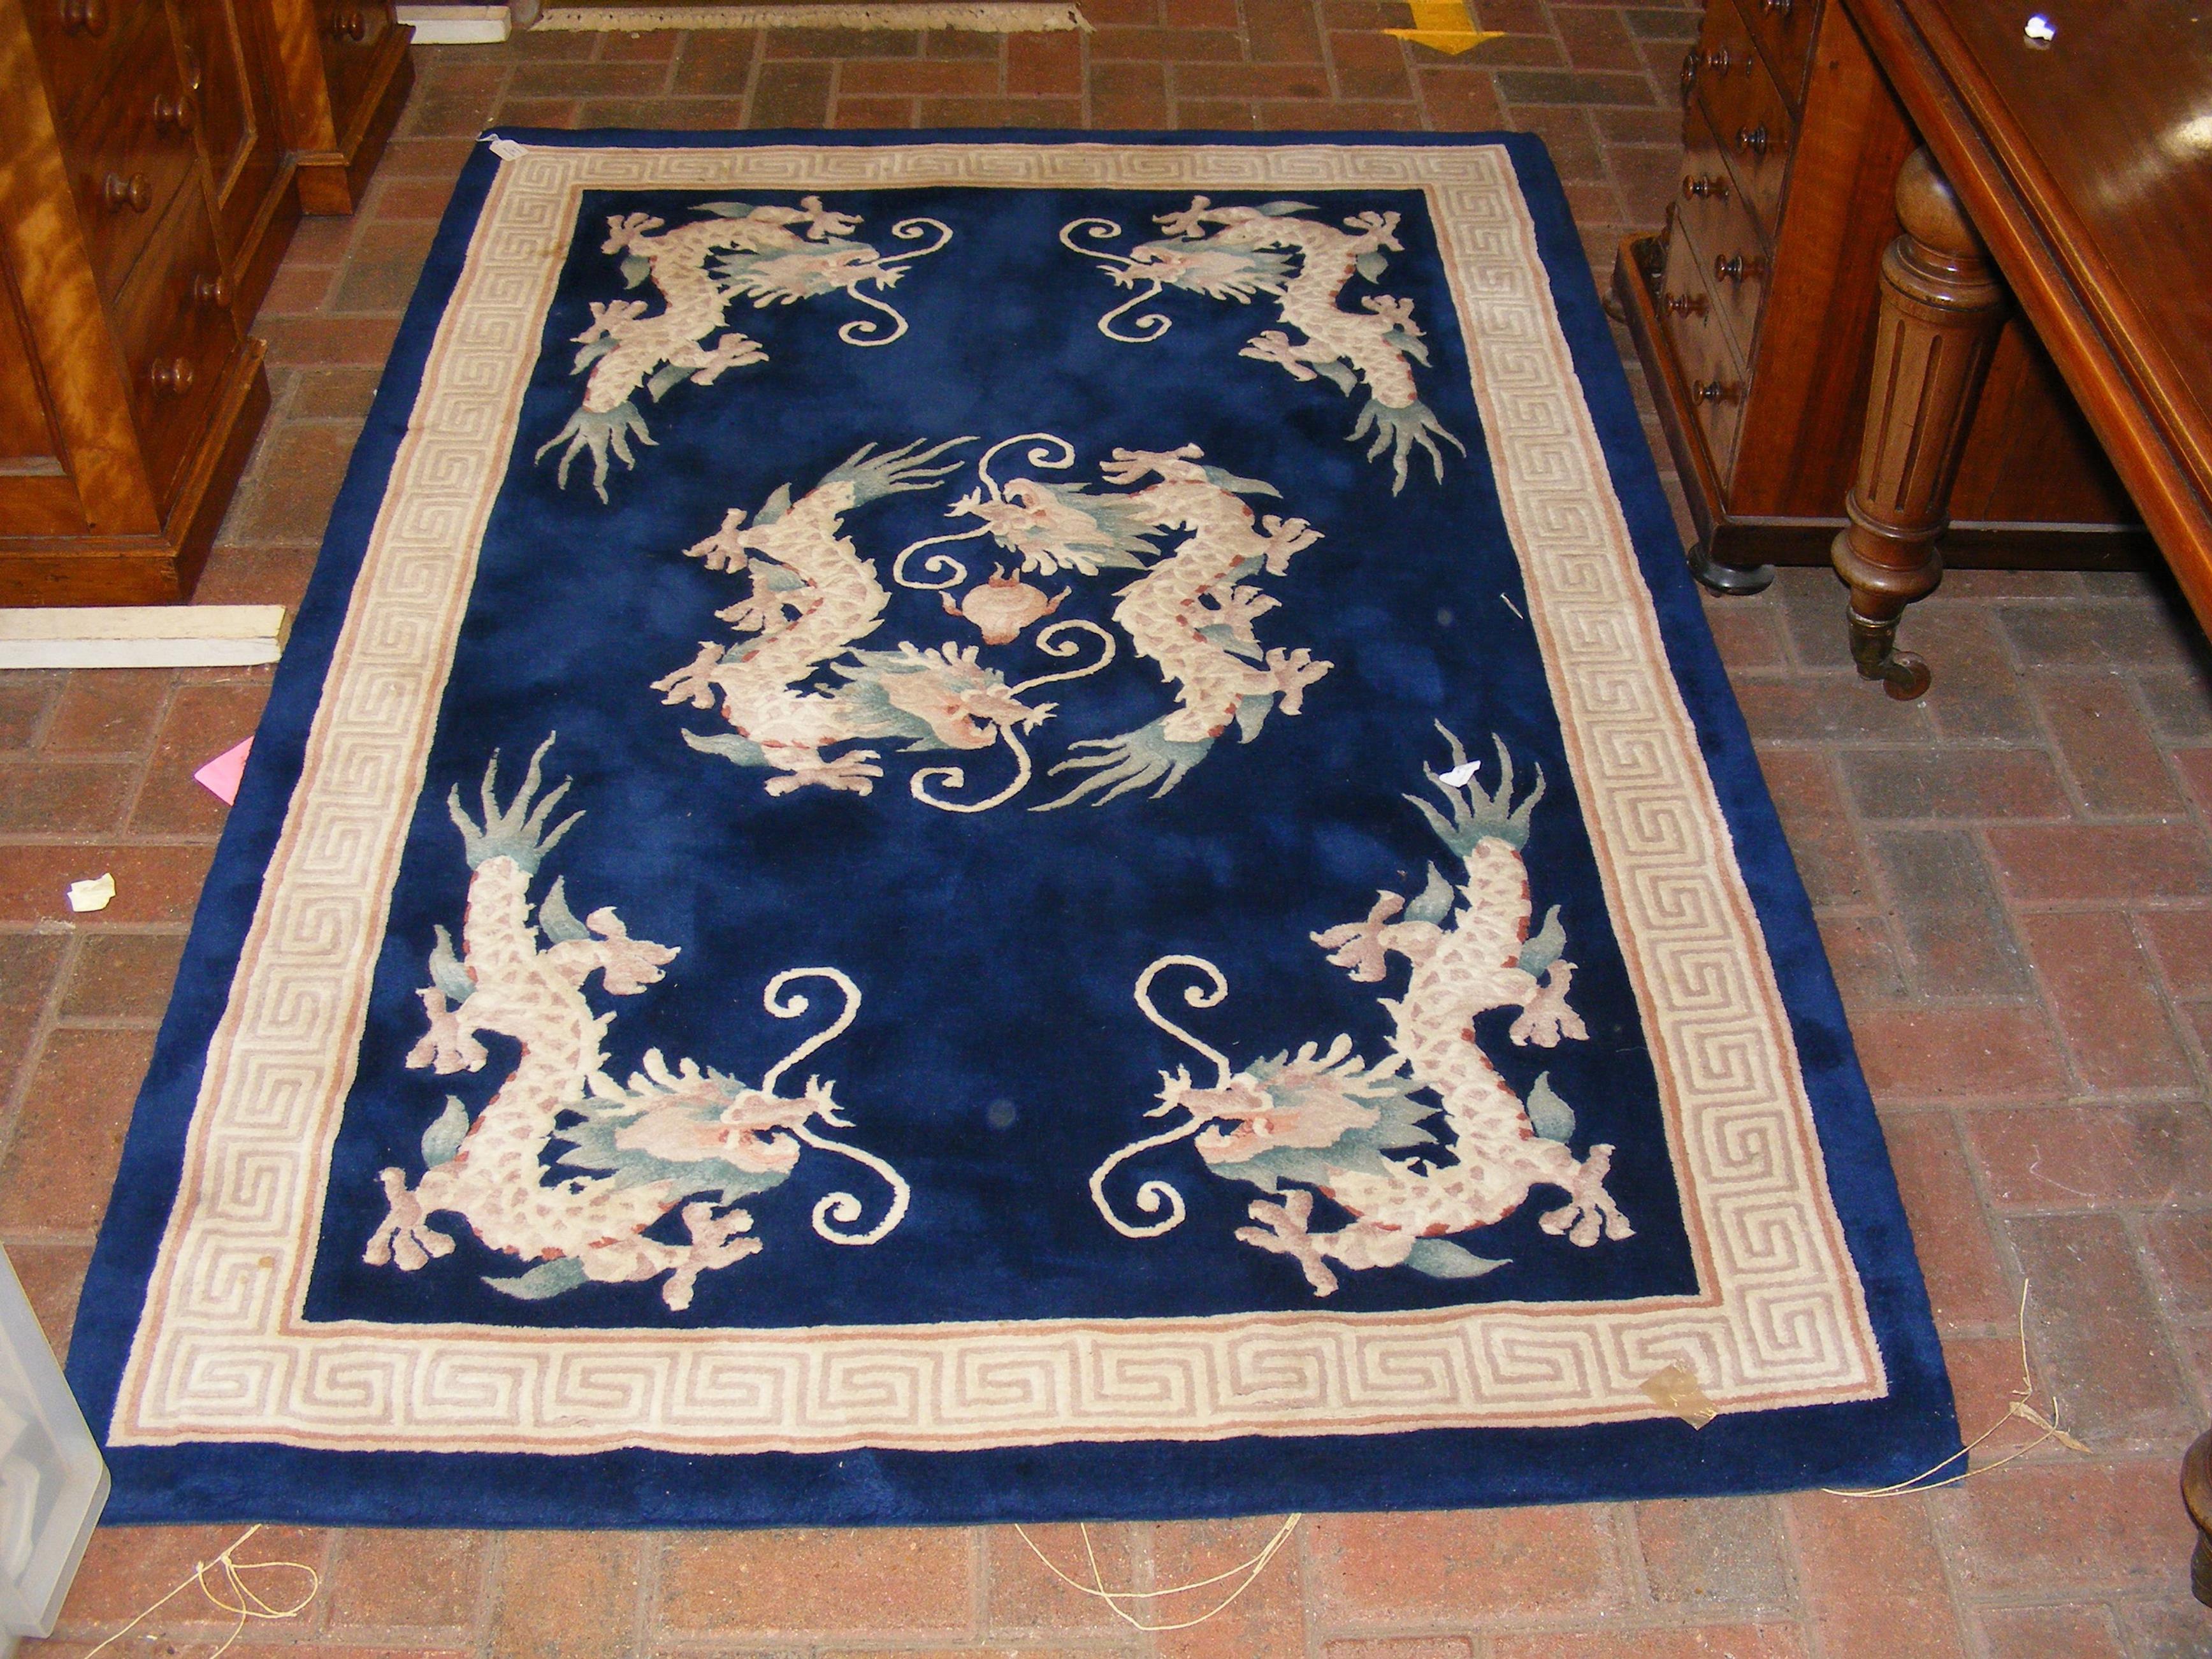 A Chinese rug with dragon design - 185cm x 124cm